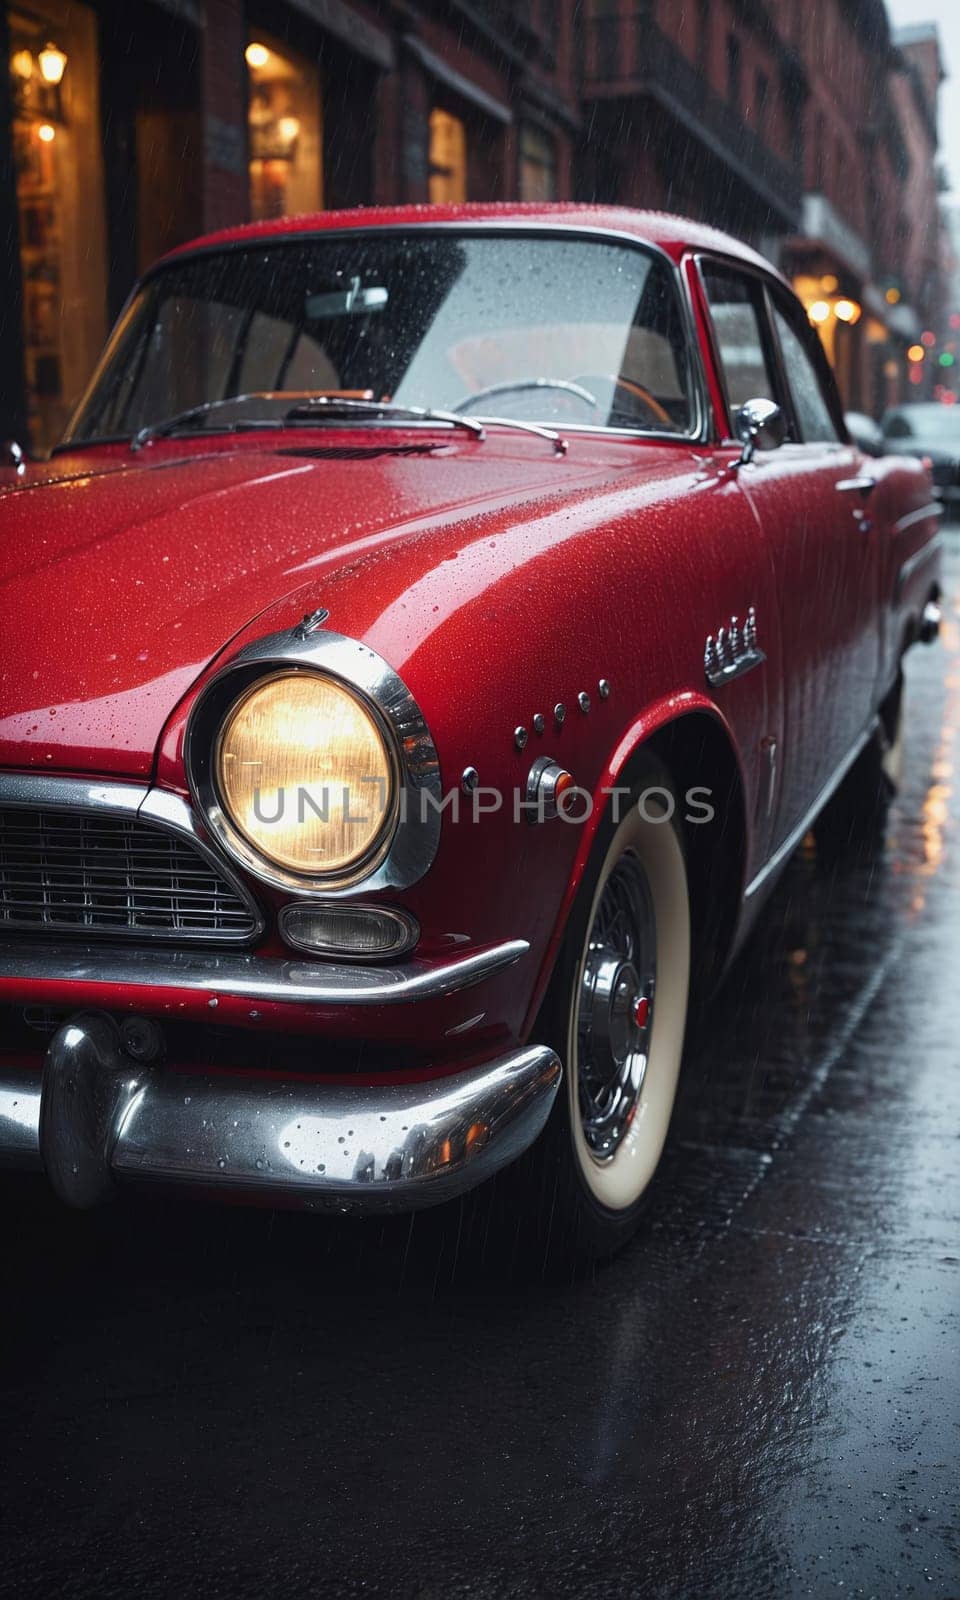 A classic red car with a shiny exterior is parked on a wet city street. The rain enhances the vibrant color of the vintage automobile.